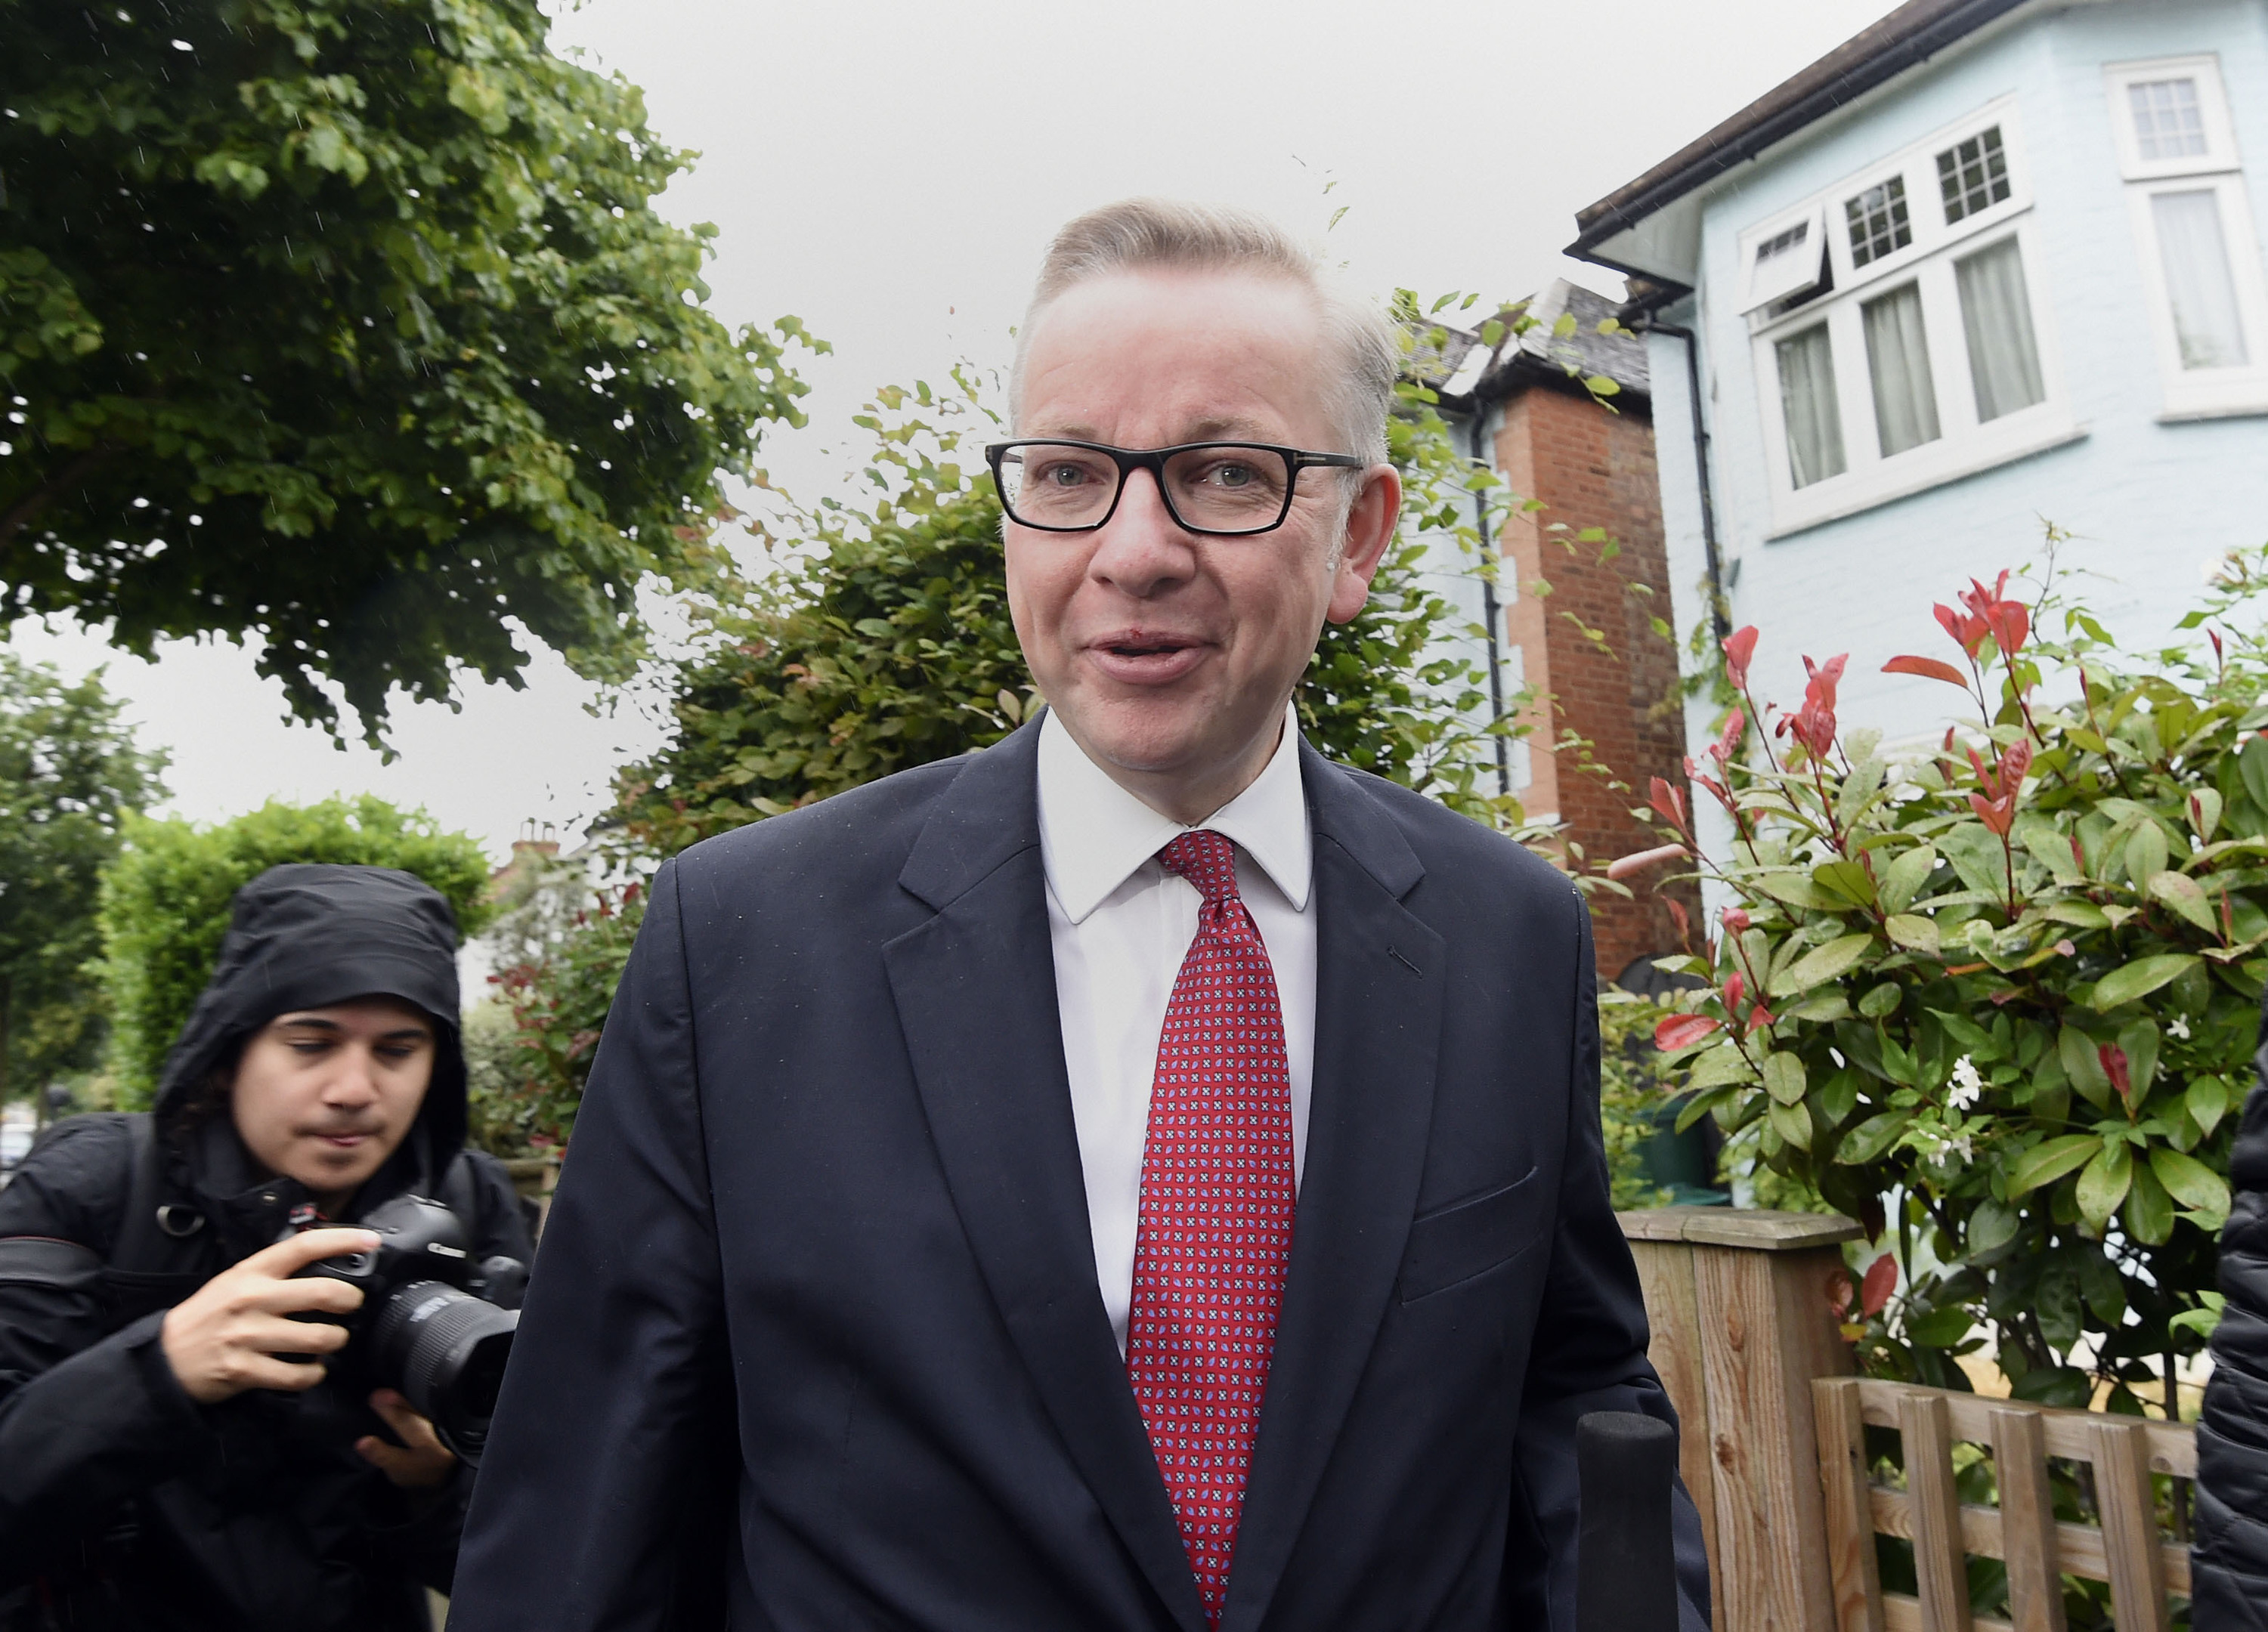 The axeman cometh: Michael Gove heading to set out his bid to be prime minister